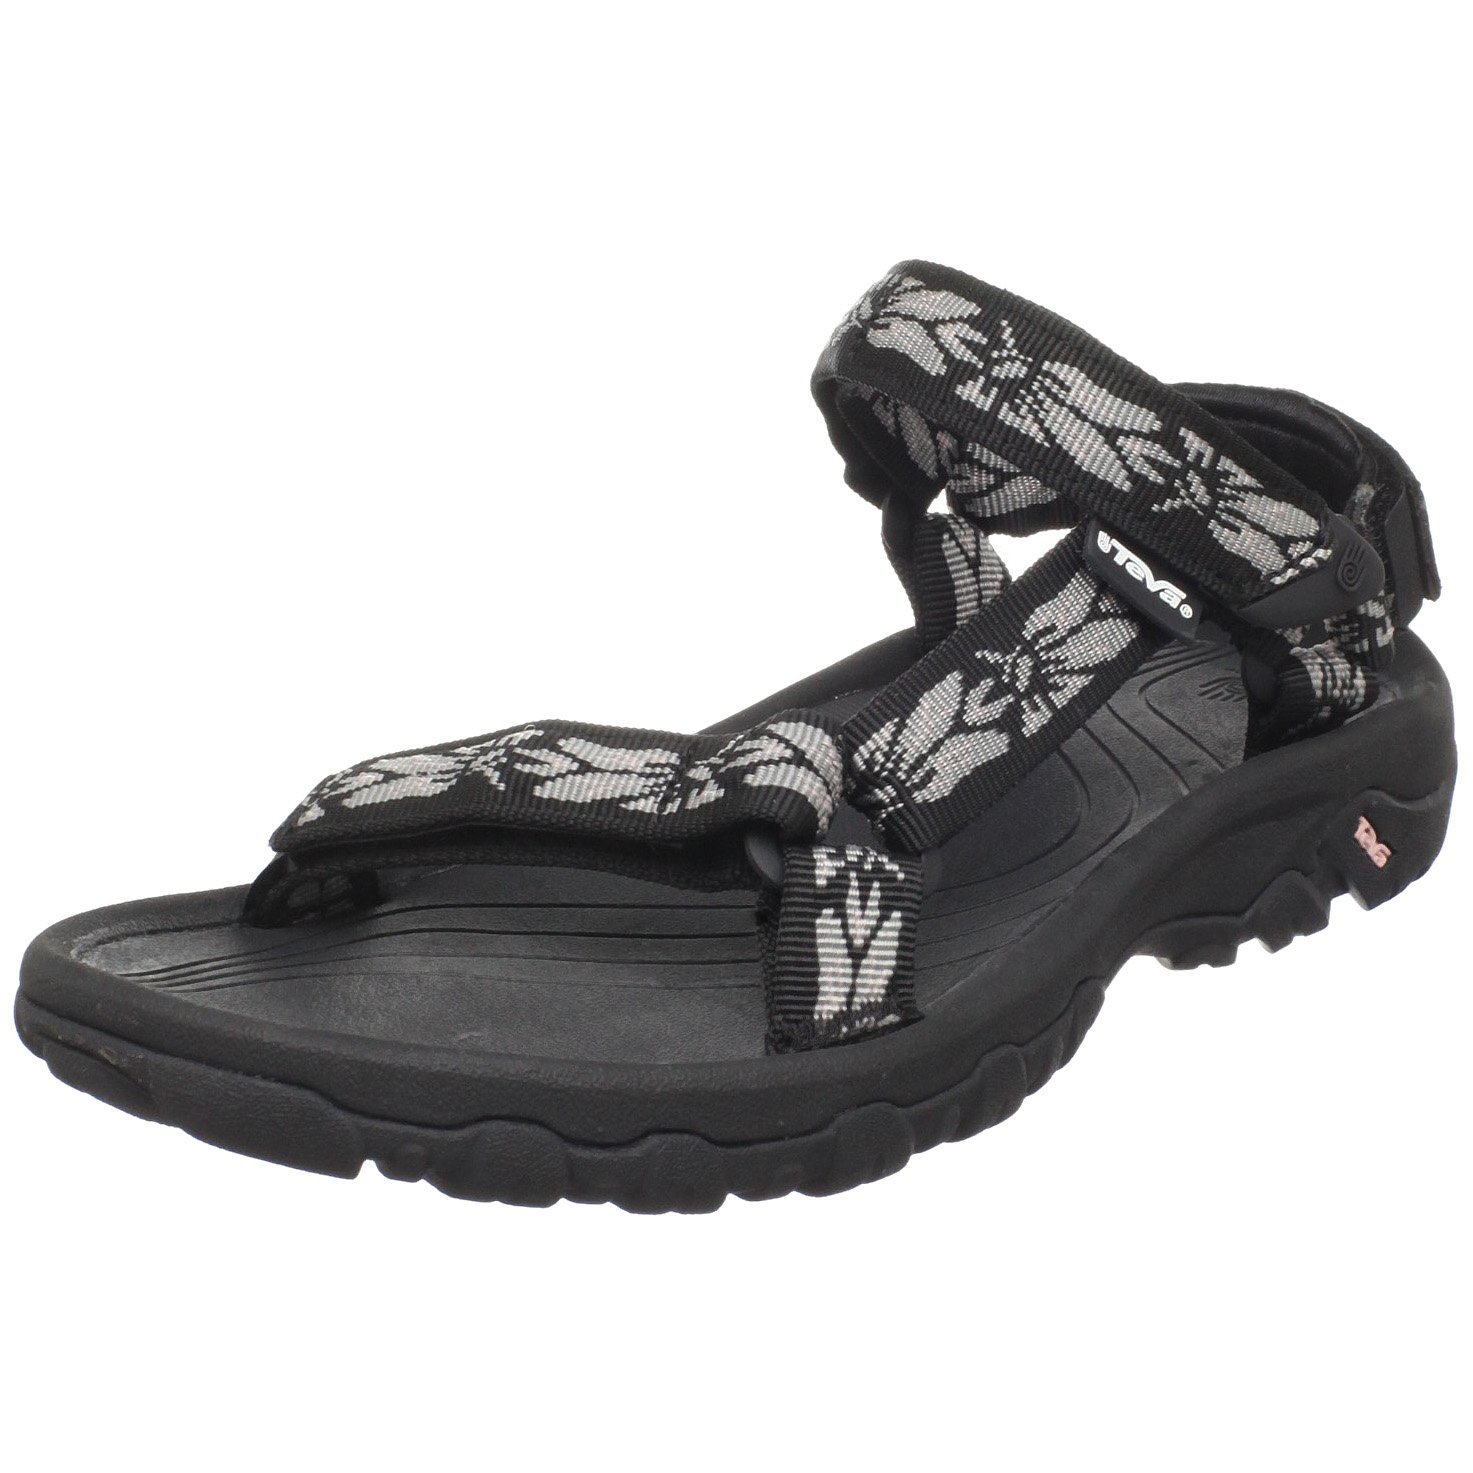 50% Off or More on Teva Shoes